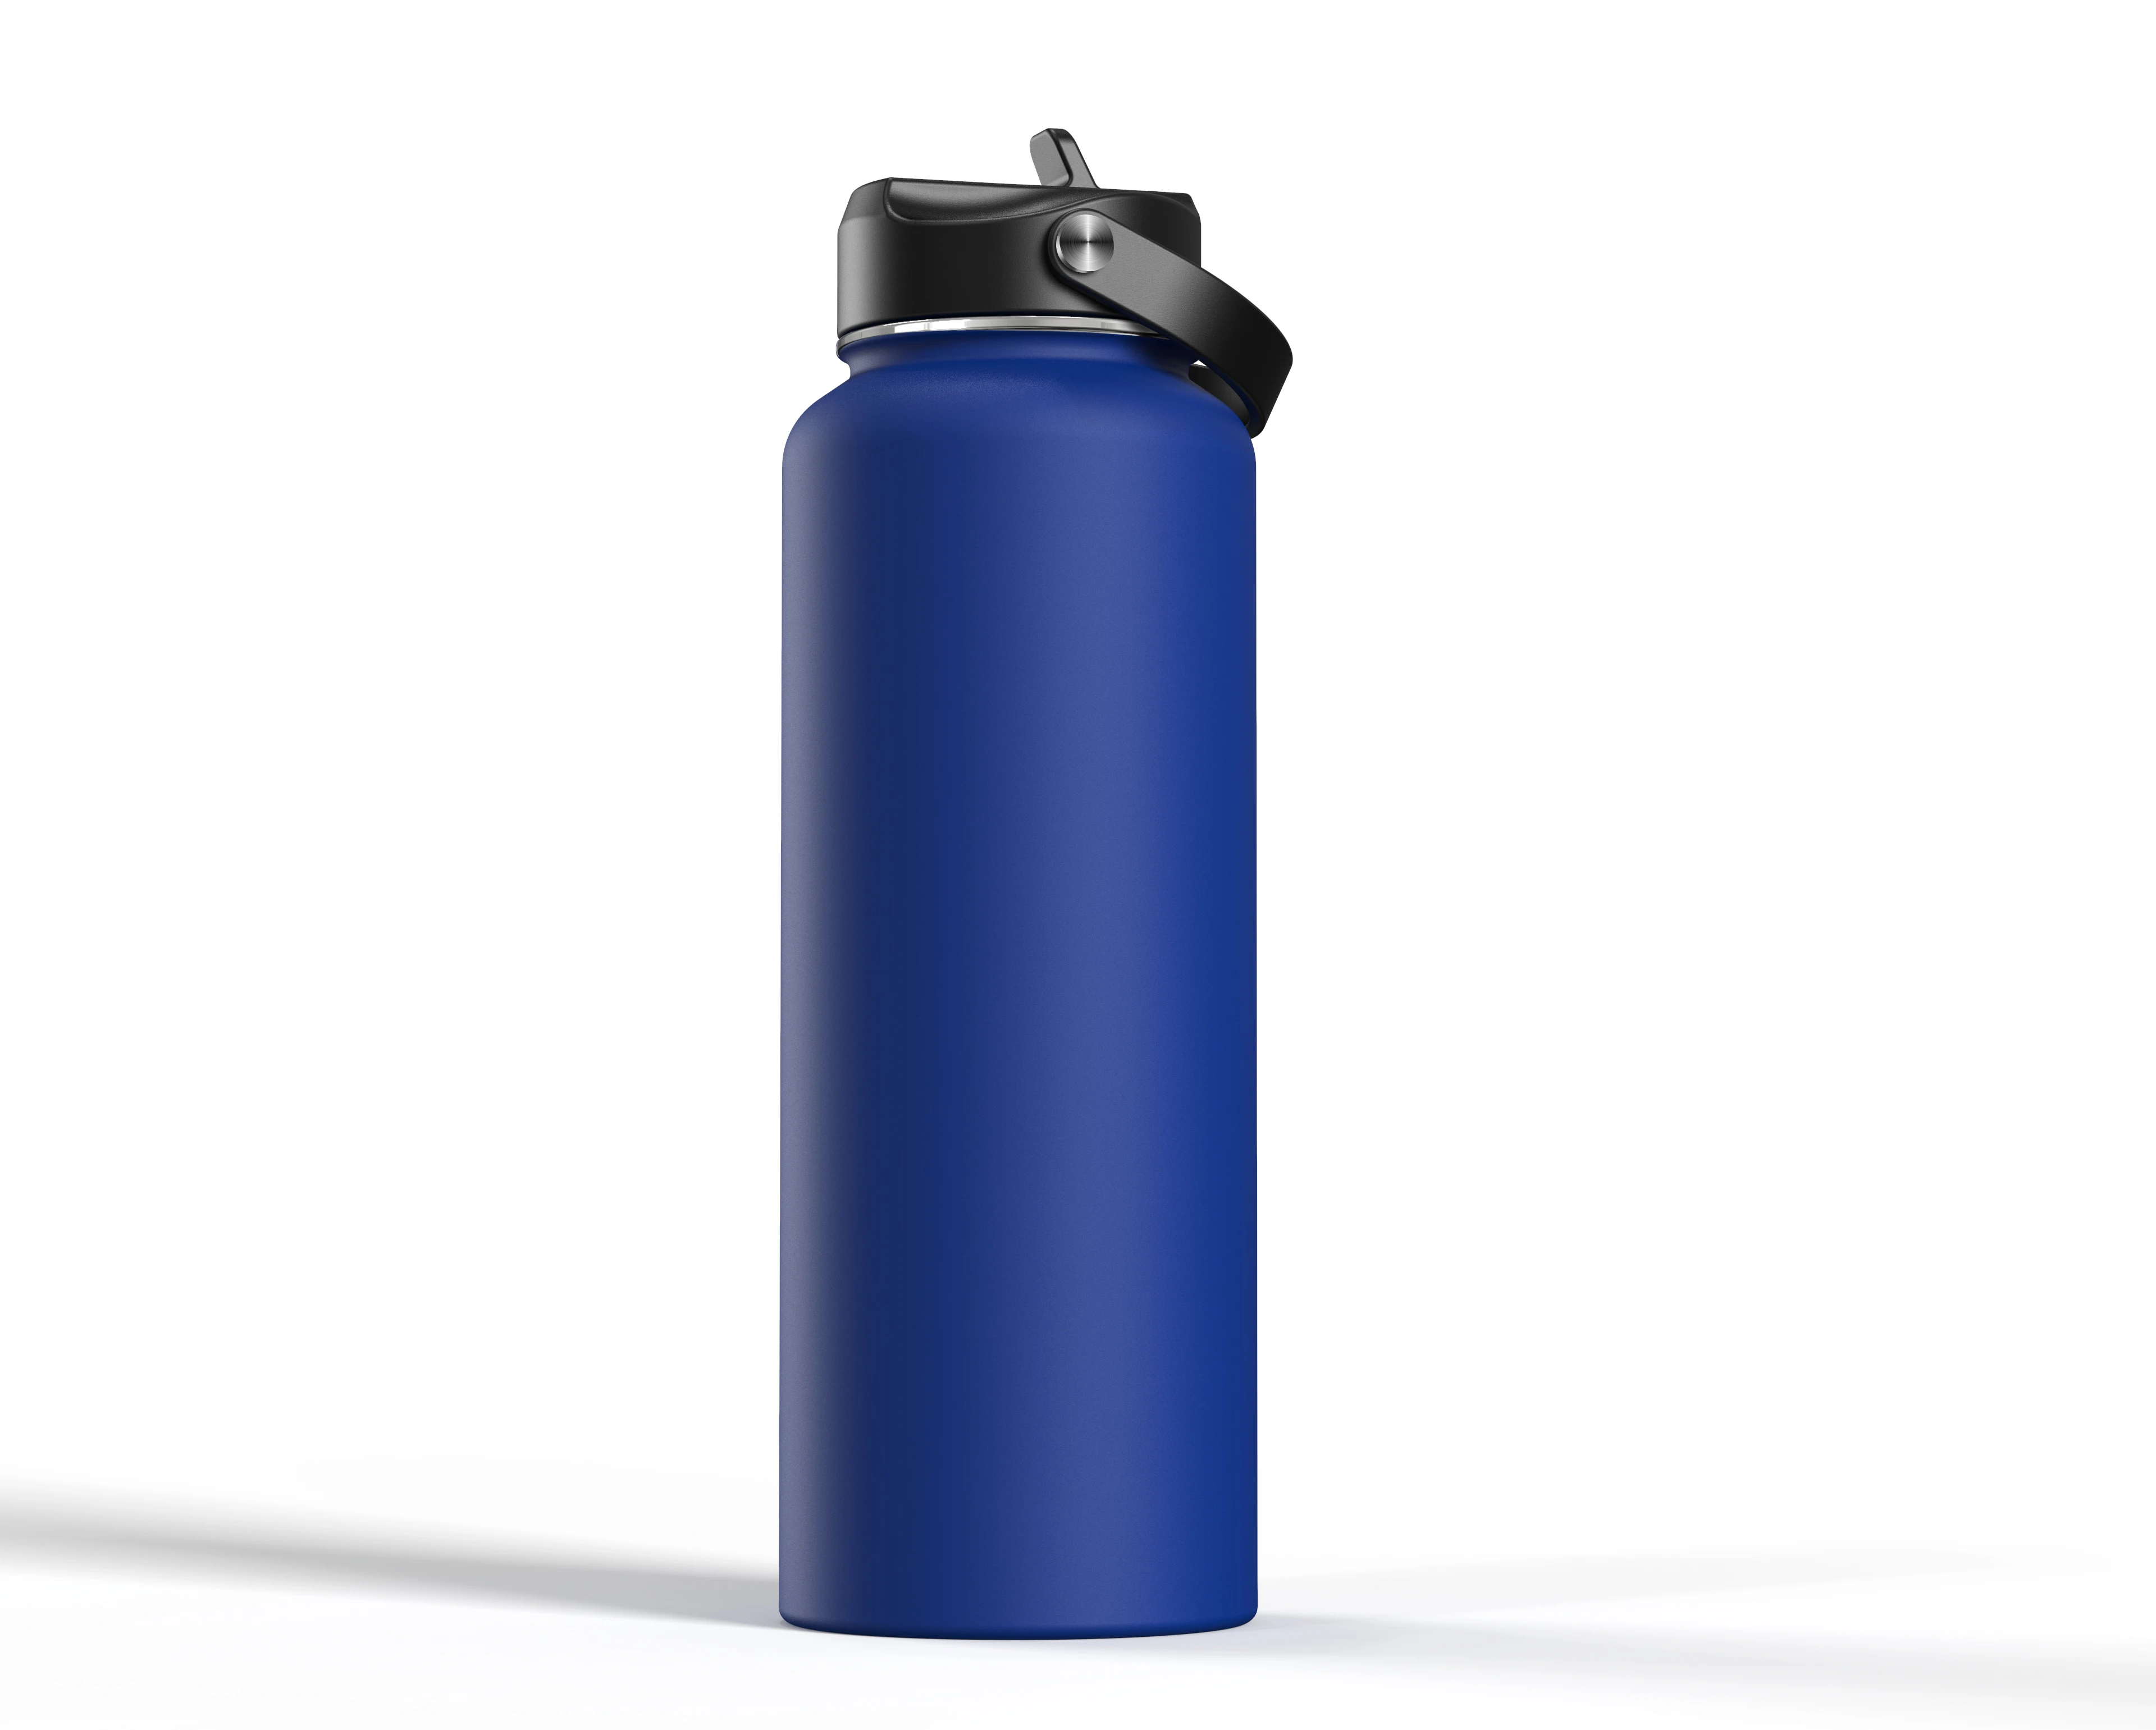 

32oz 40oz Hydro Summit Water Bottles Flask, Stainless Steel Double Wall Vacuum Insulated Wide Mouth Bottle with Flip Lid, Customized, any colors are available by pantone code